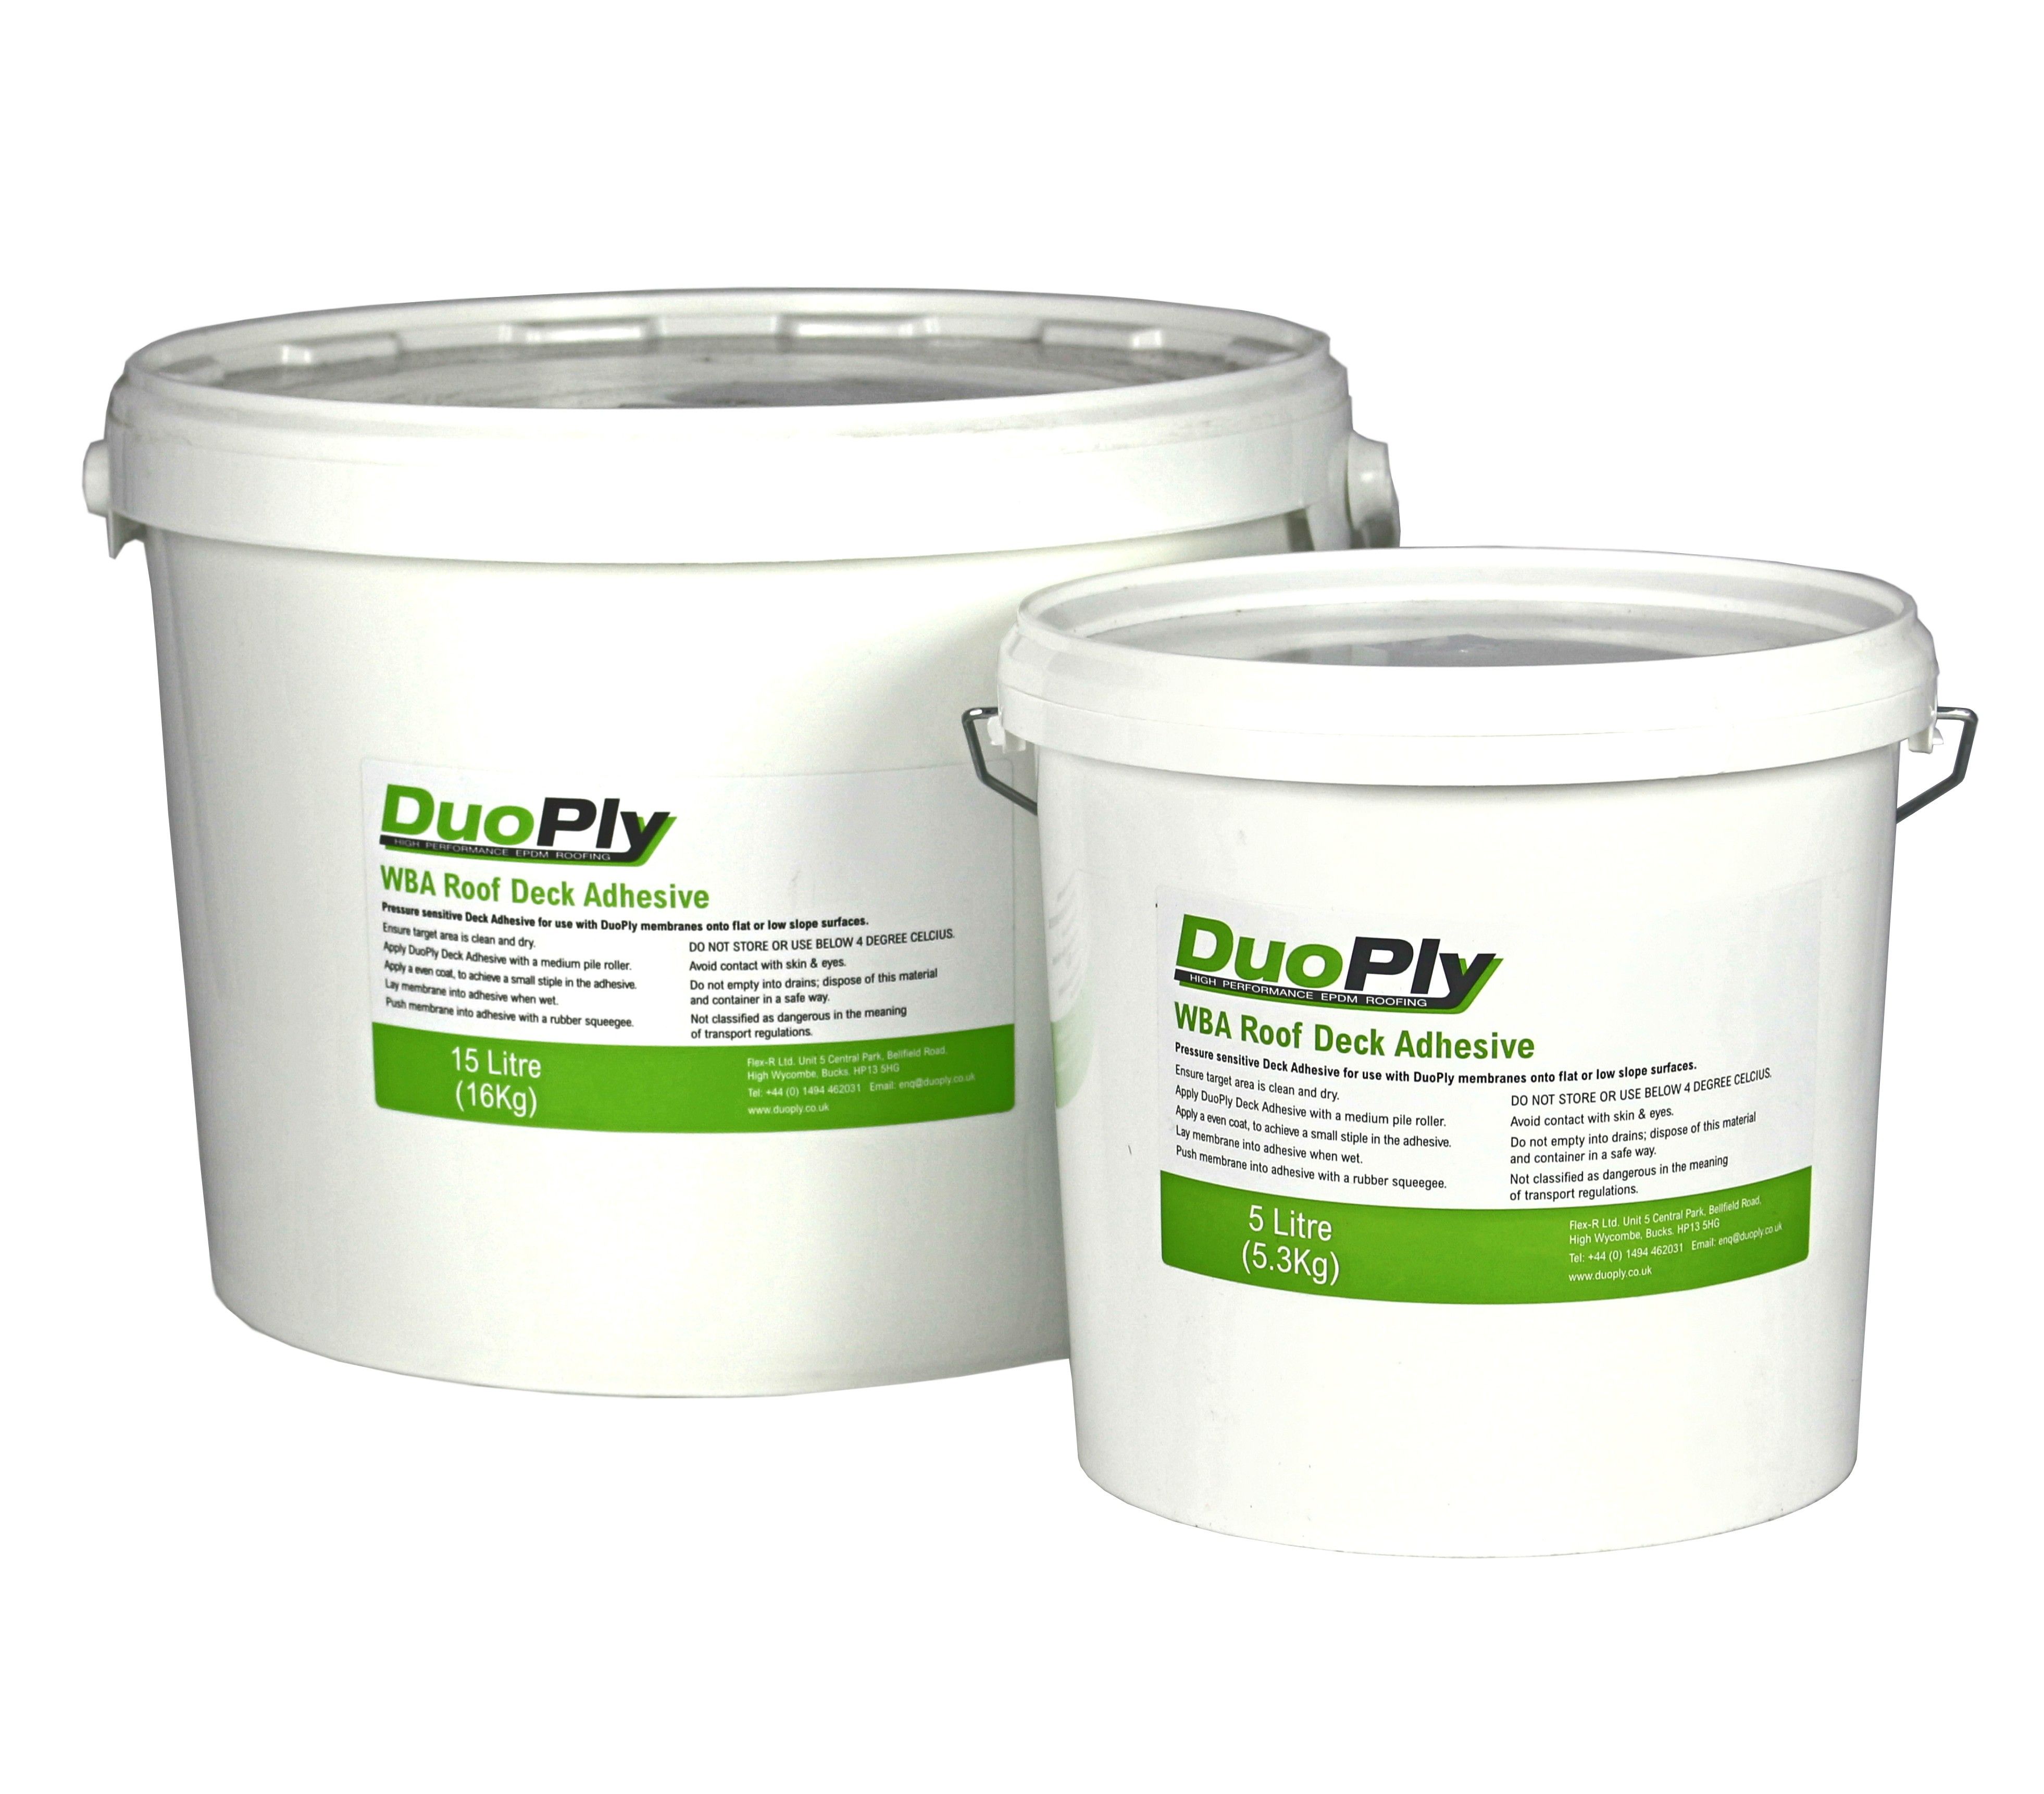 Duoply - Water Based Deck Adhesive (5 Litres - 15 to 20 sqm)